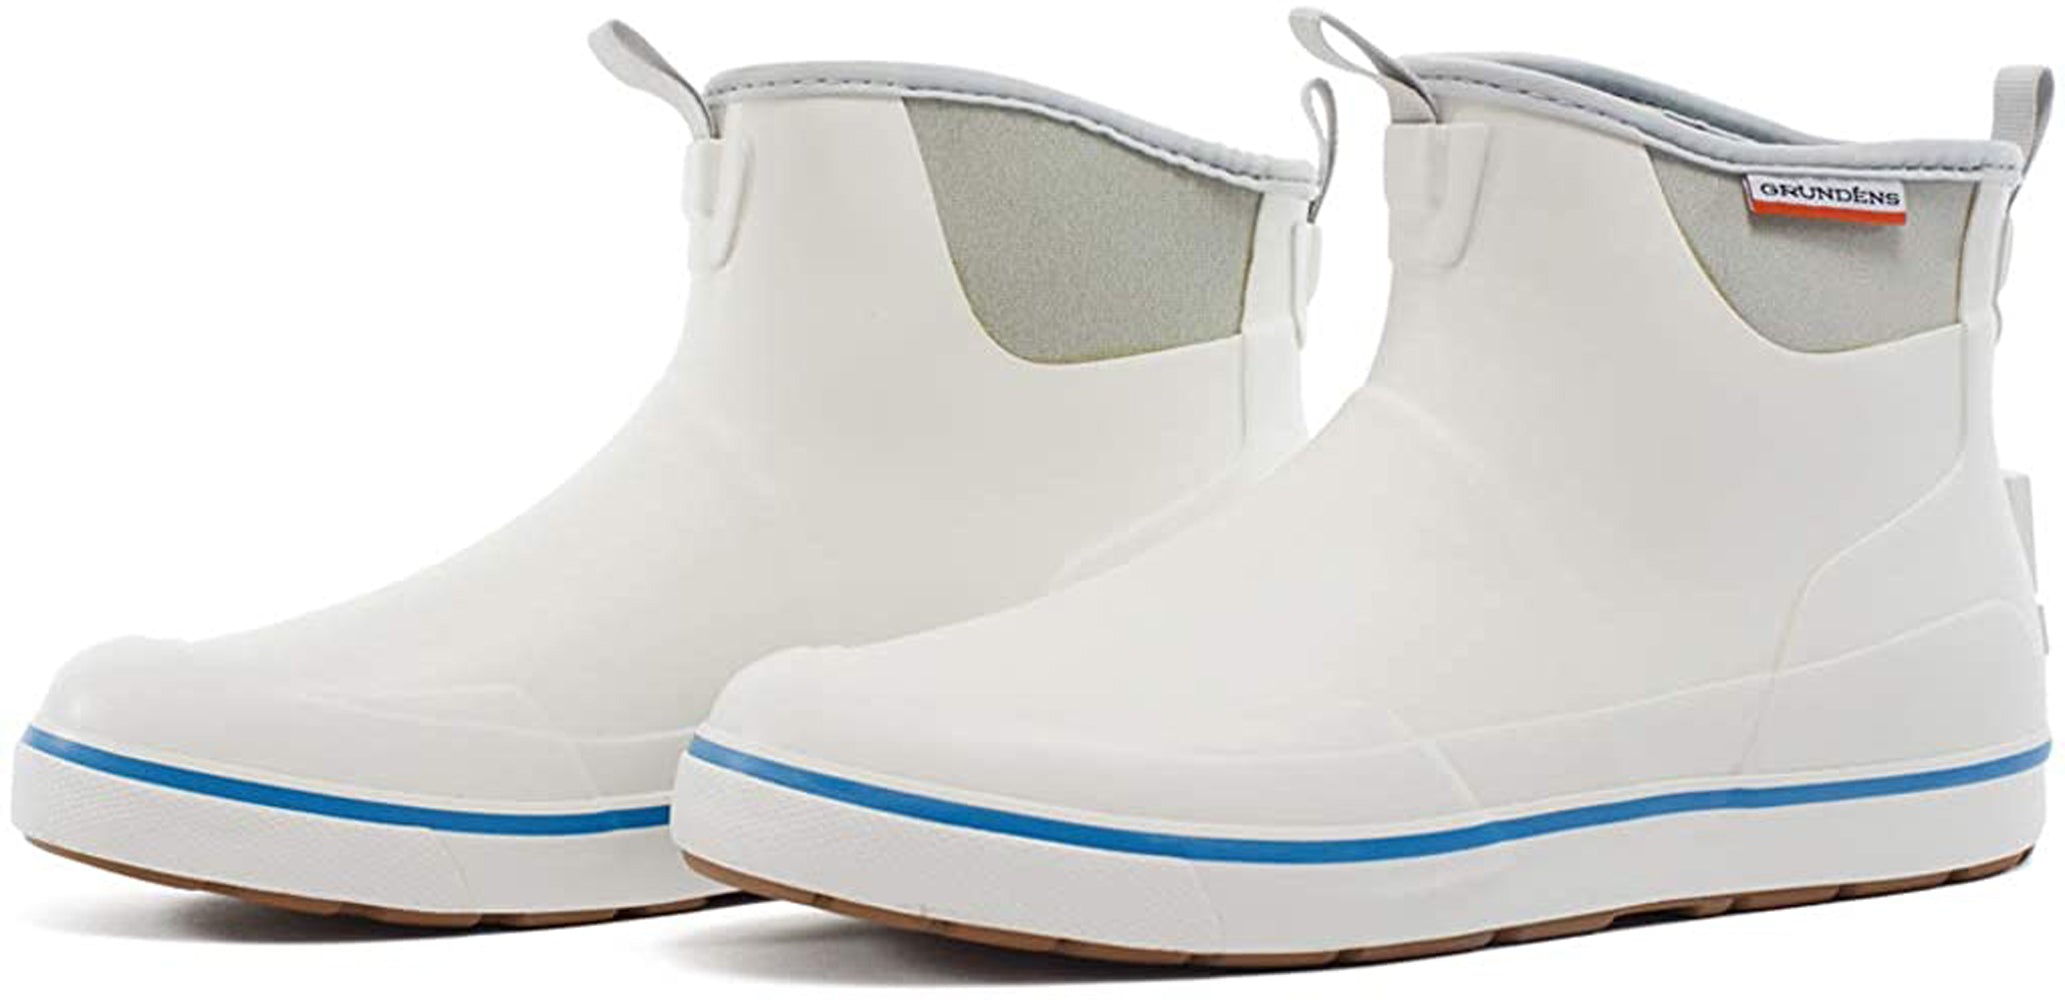 Deck-Boss Ankle Boot in White color from the side view